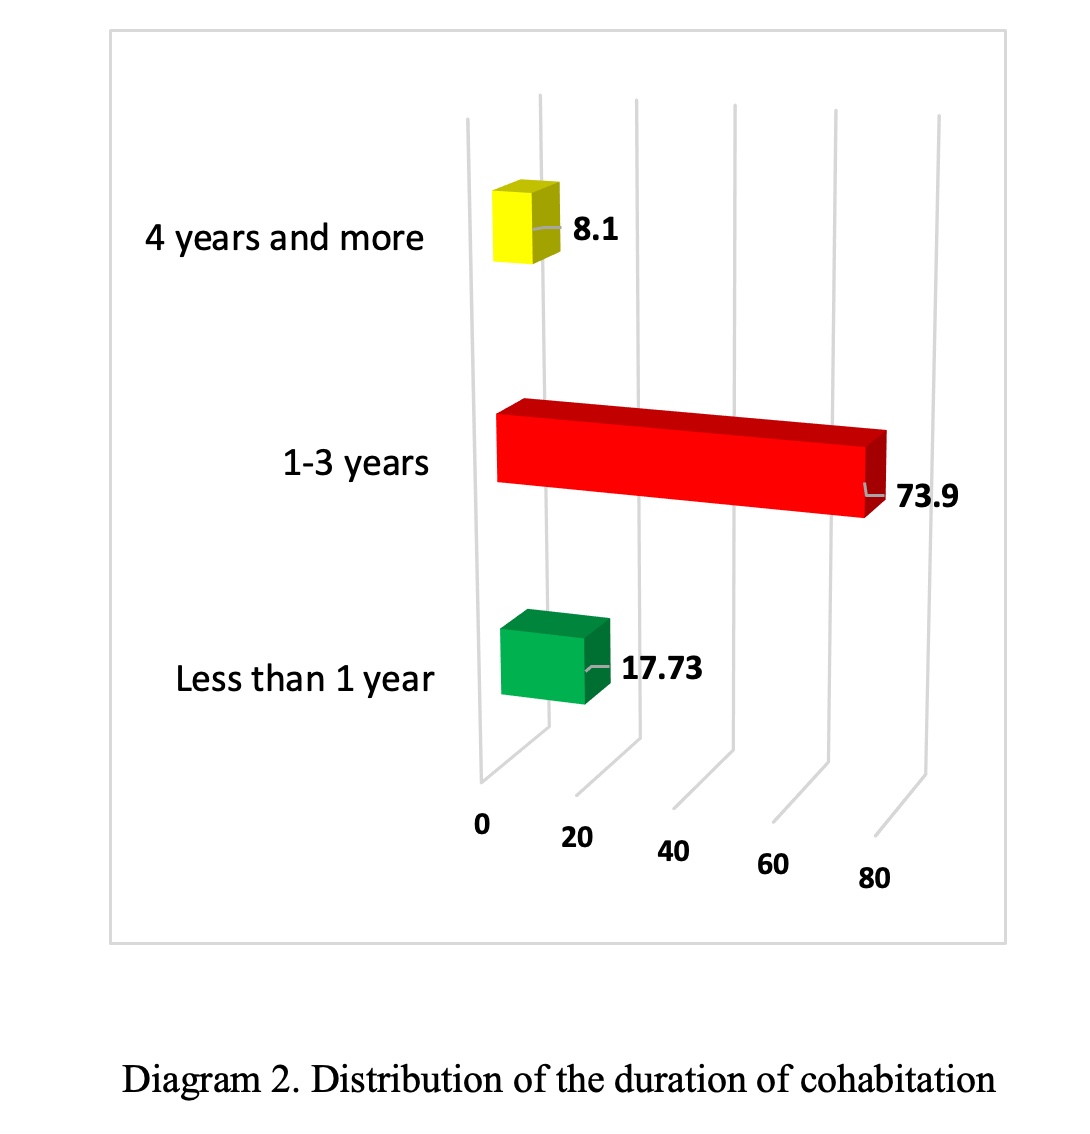 distribution of the duration of cohabitaion